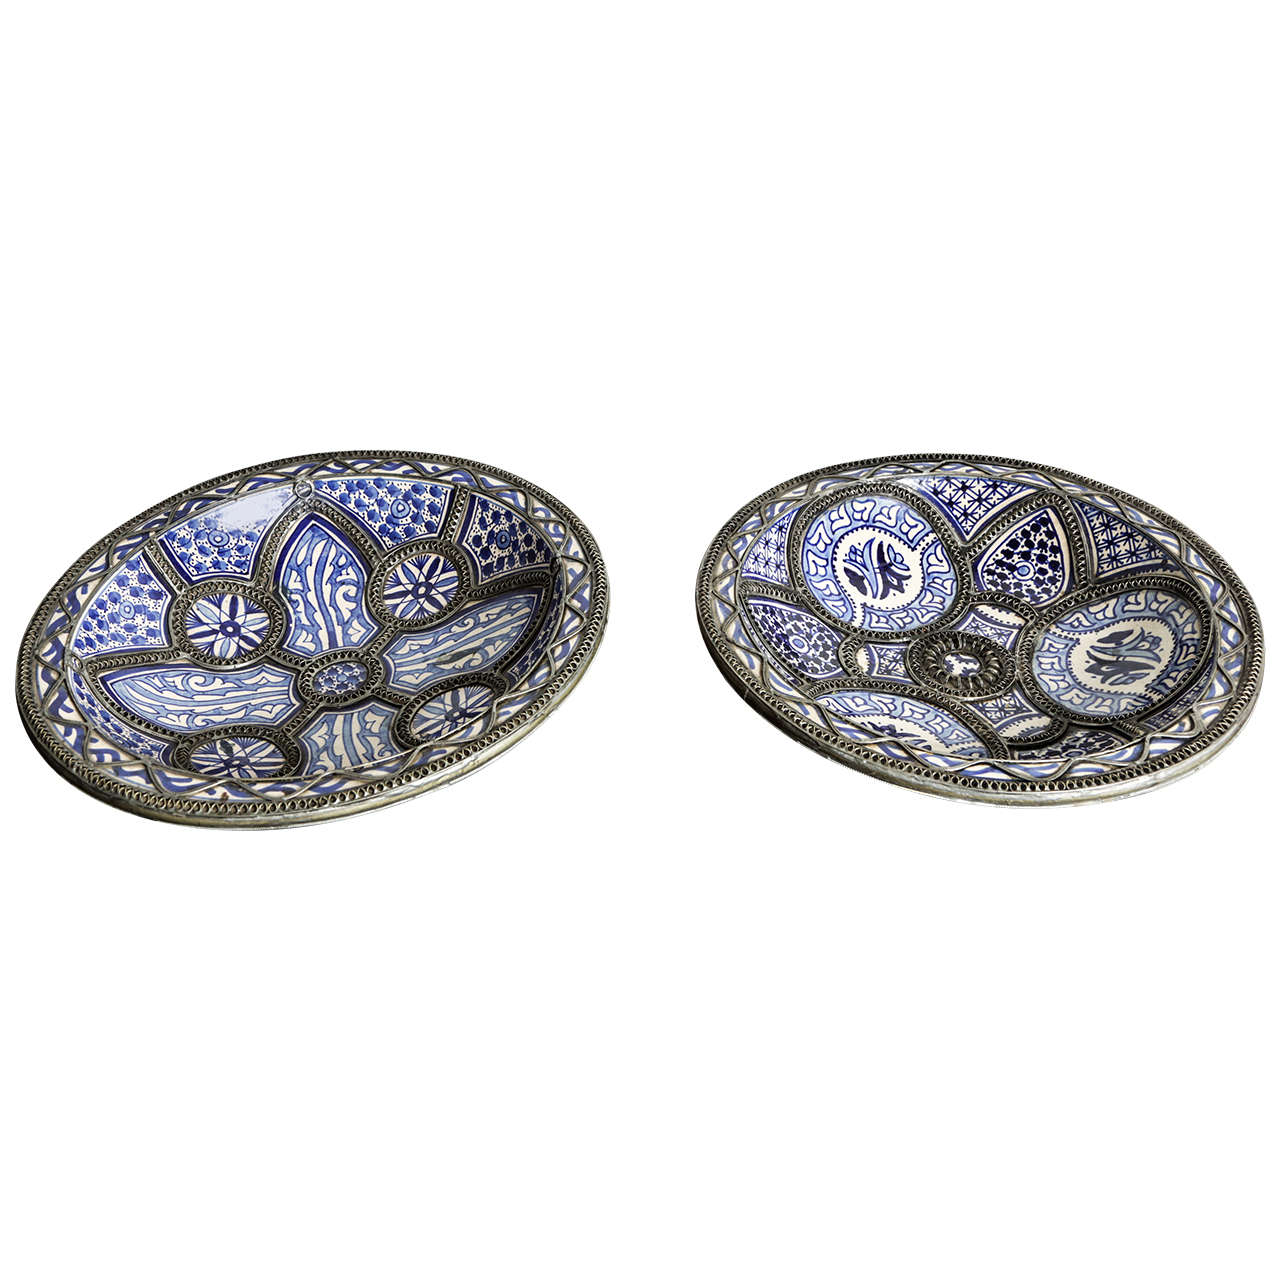 Pair of Large Moroccan Ceramic Plates for Fez